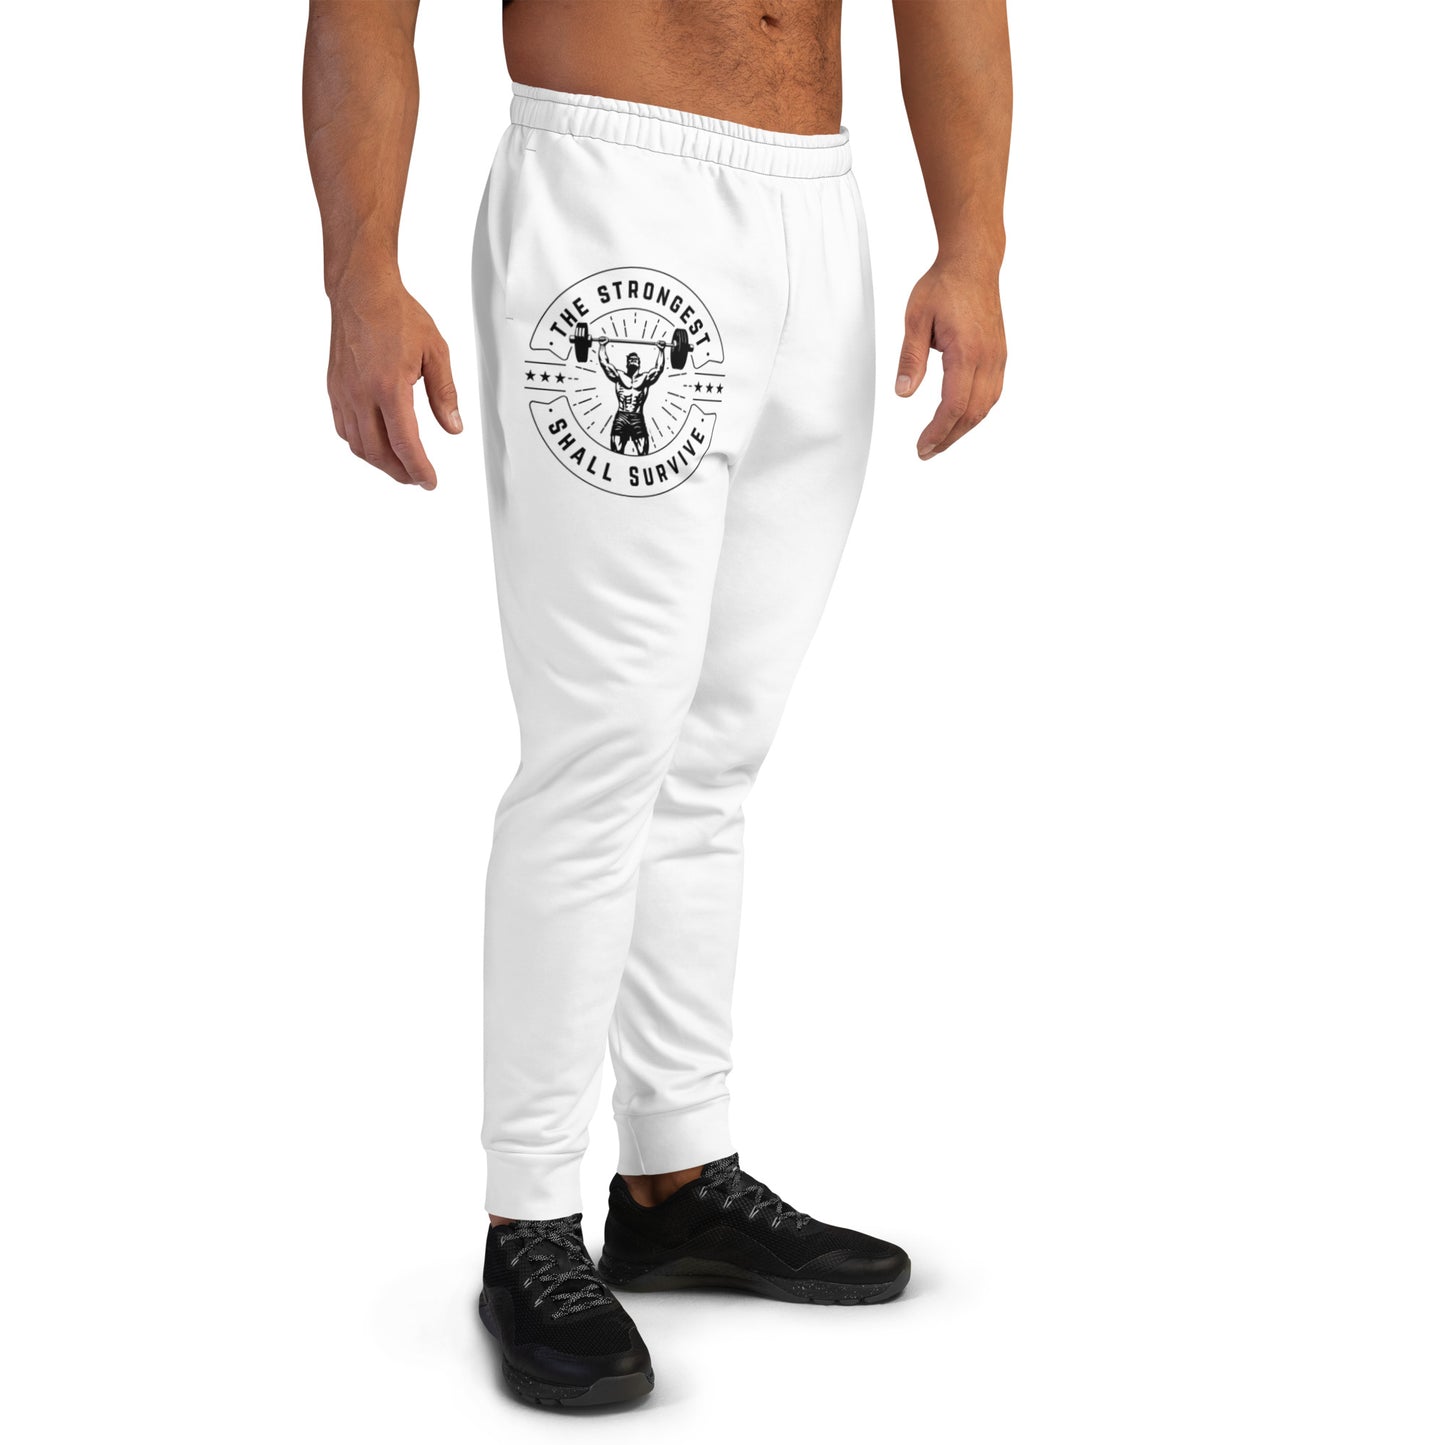 Men's Weightlifting Jogger's